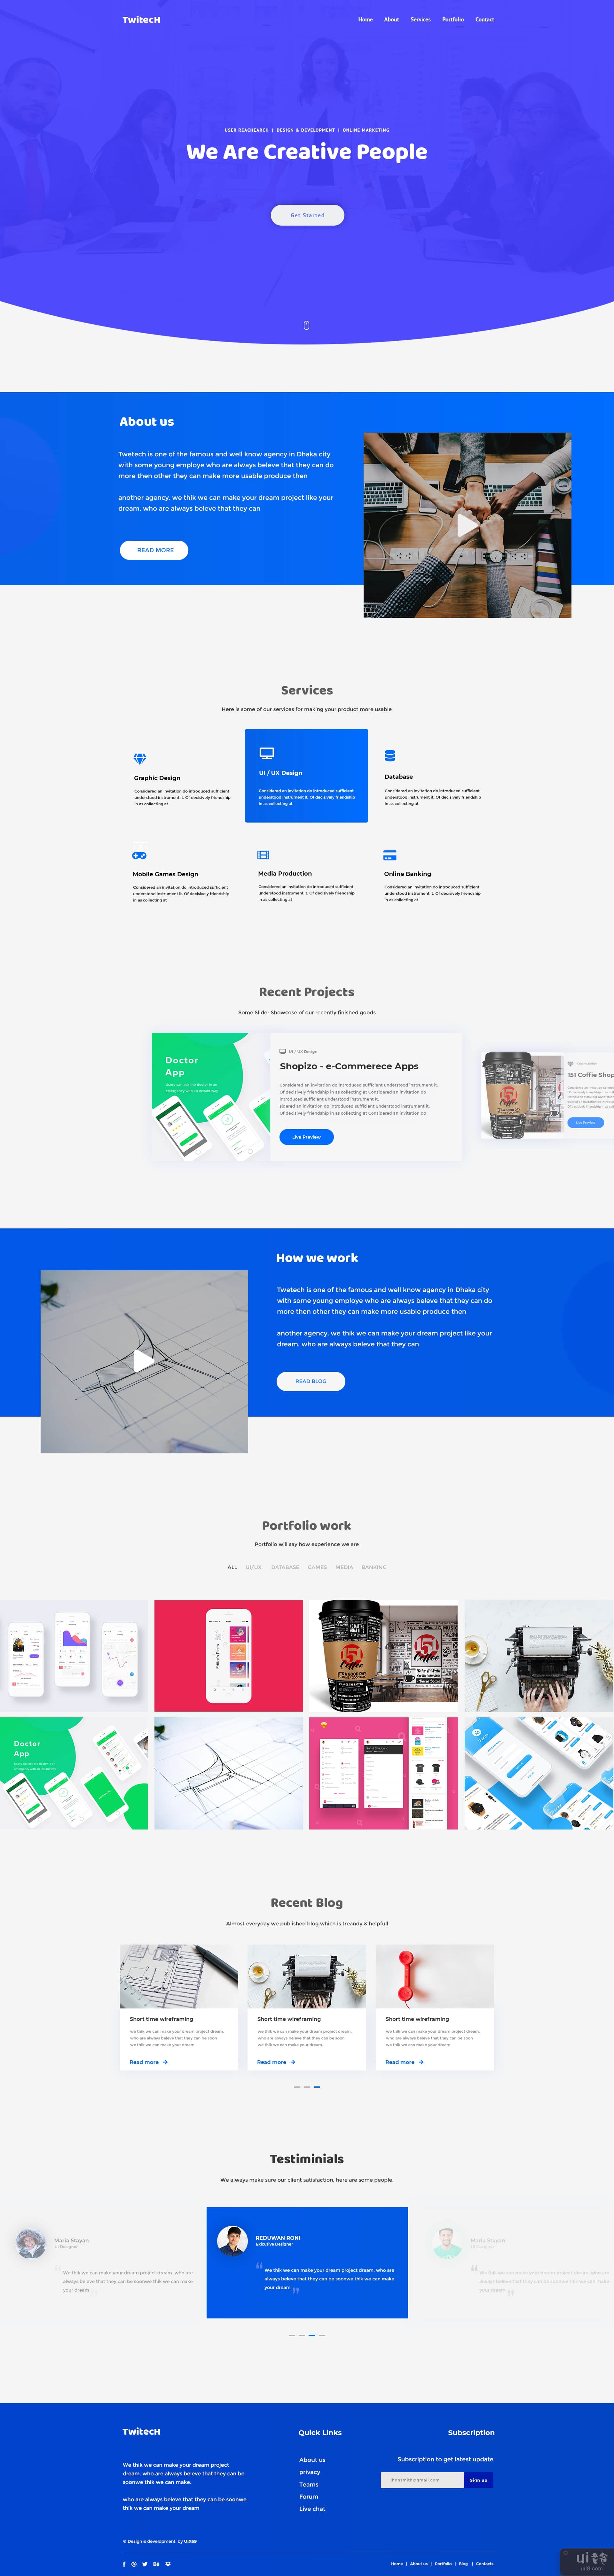 Twintech Agency - 登陆页面界面(Twintech Agency - Landing Page Interface)插图